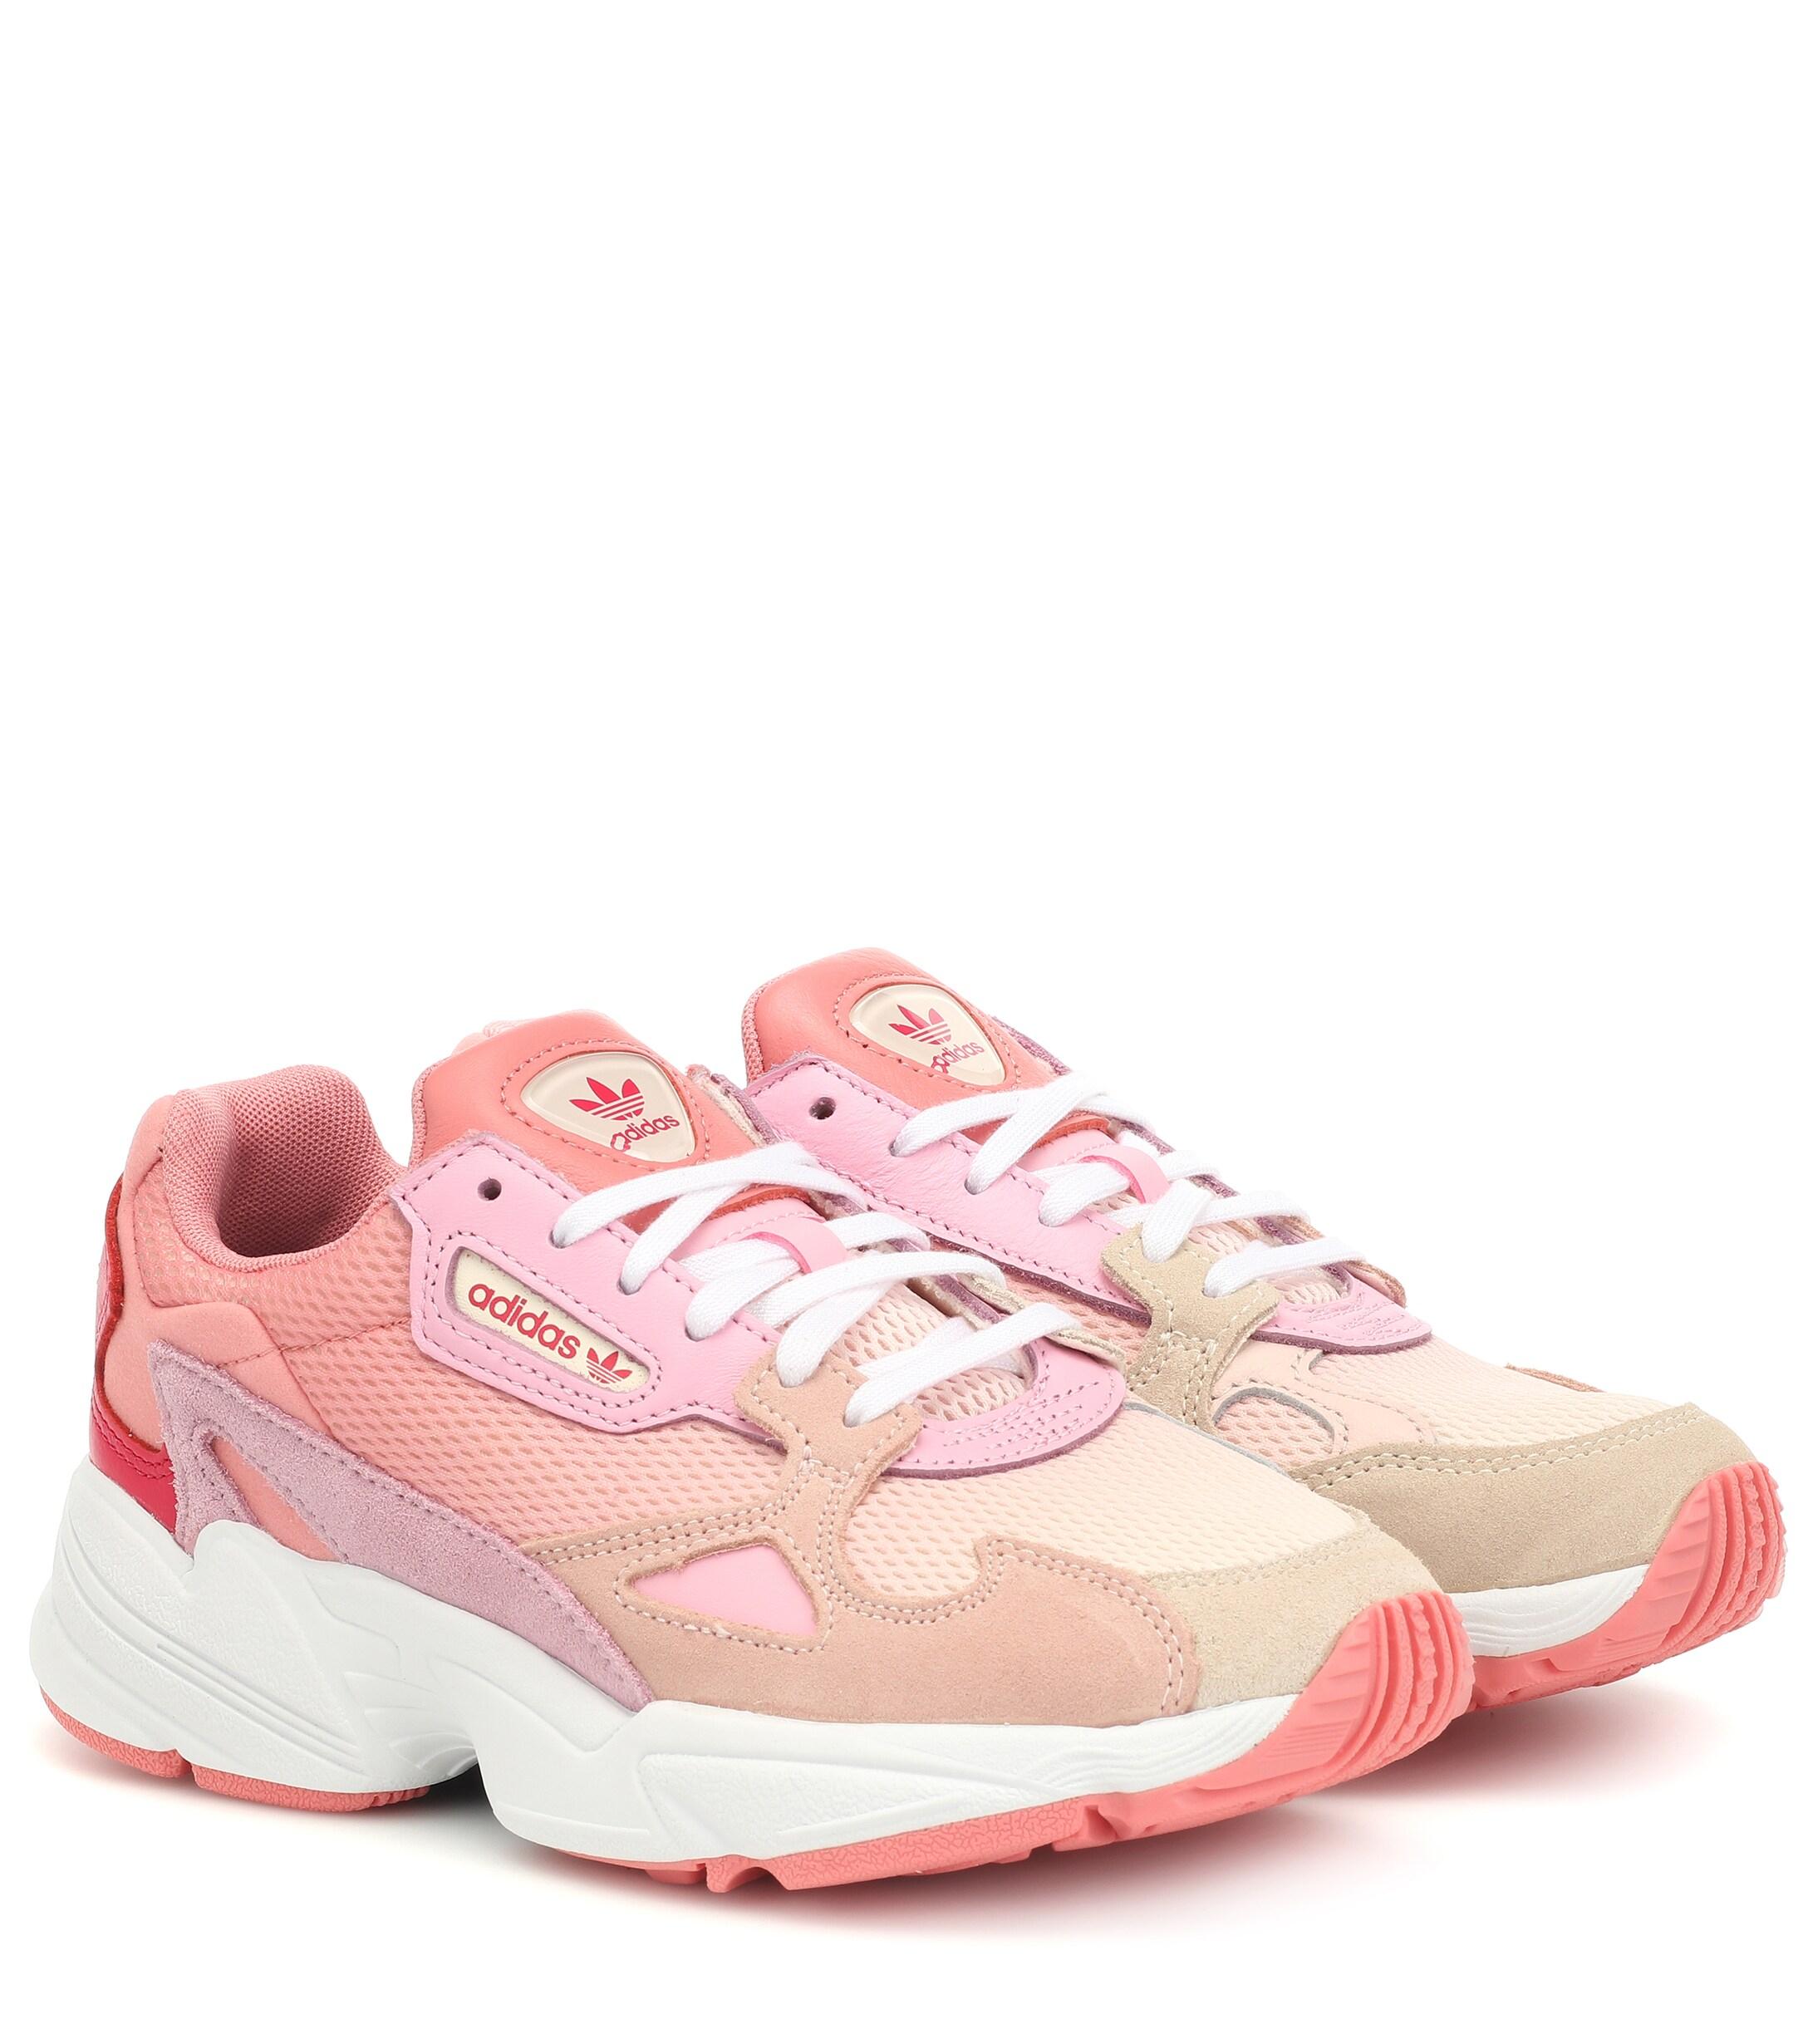 adidas Originals Leather Falcon in Peach/Peach (Pink) - Save 56% | Lyst